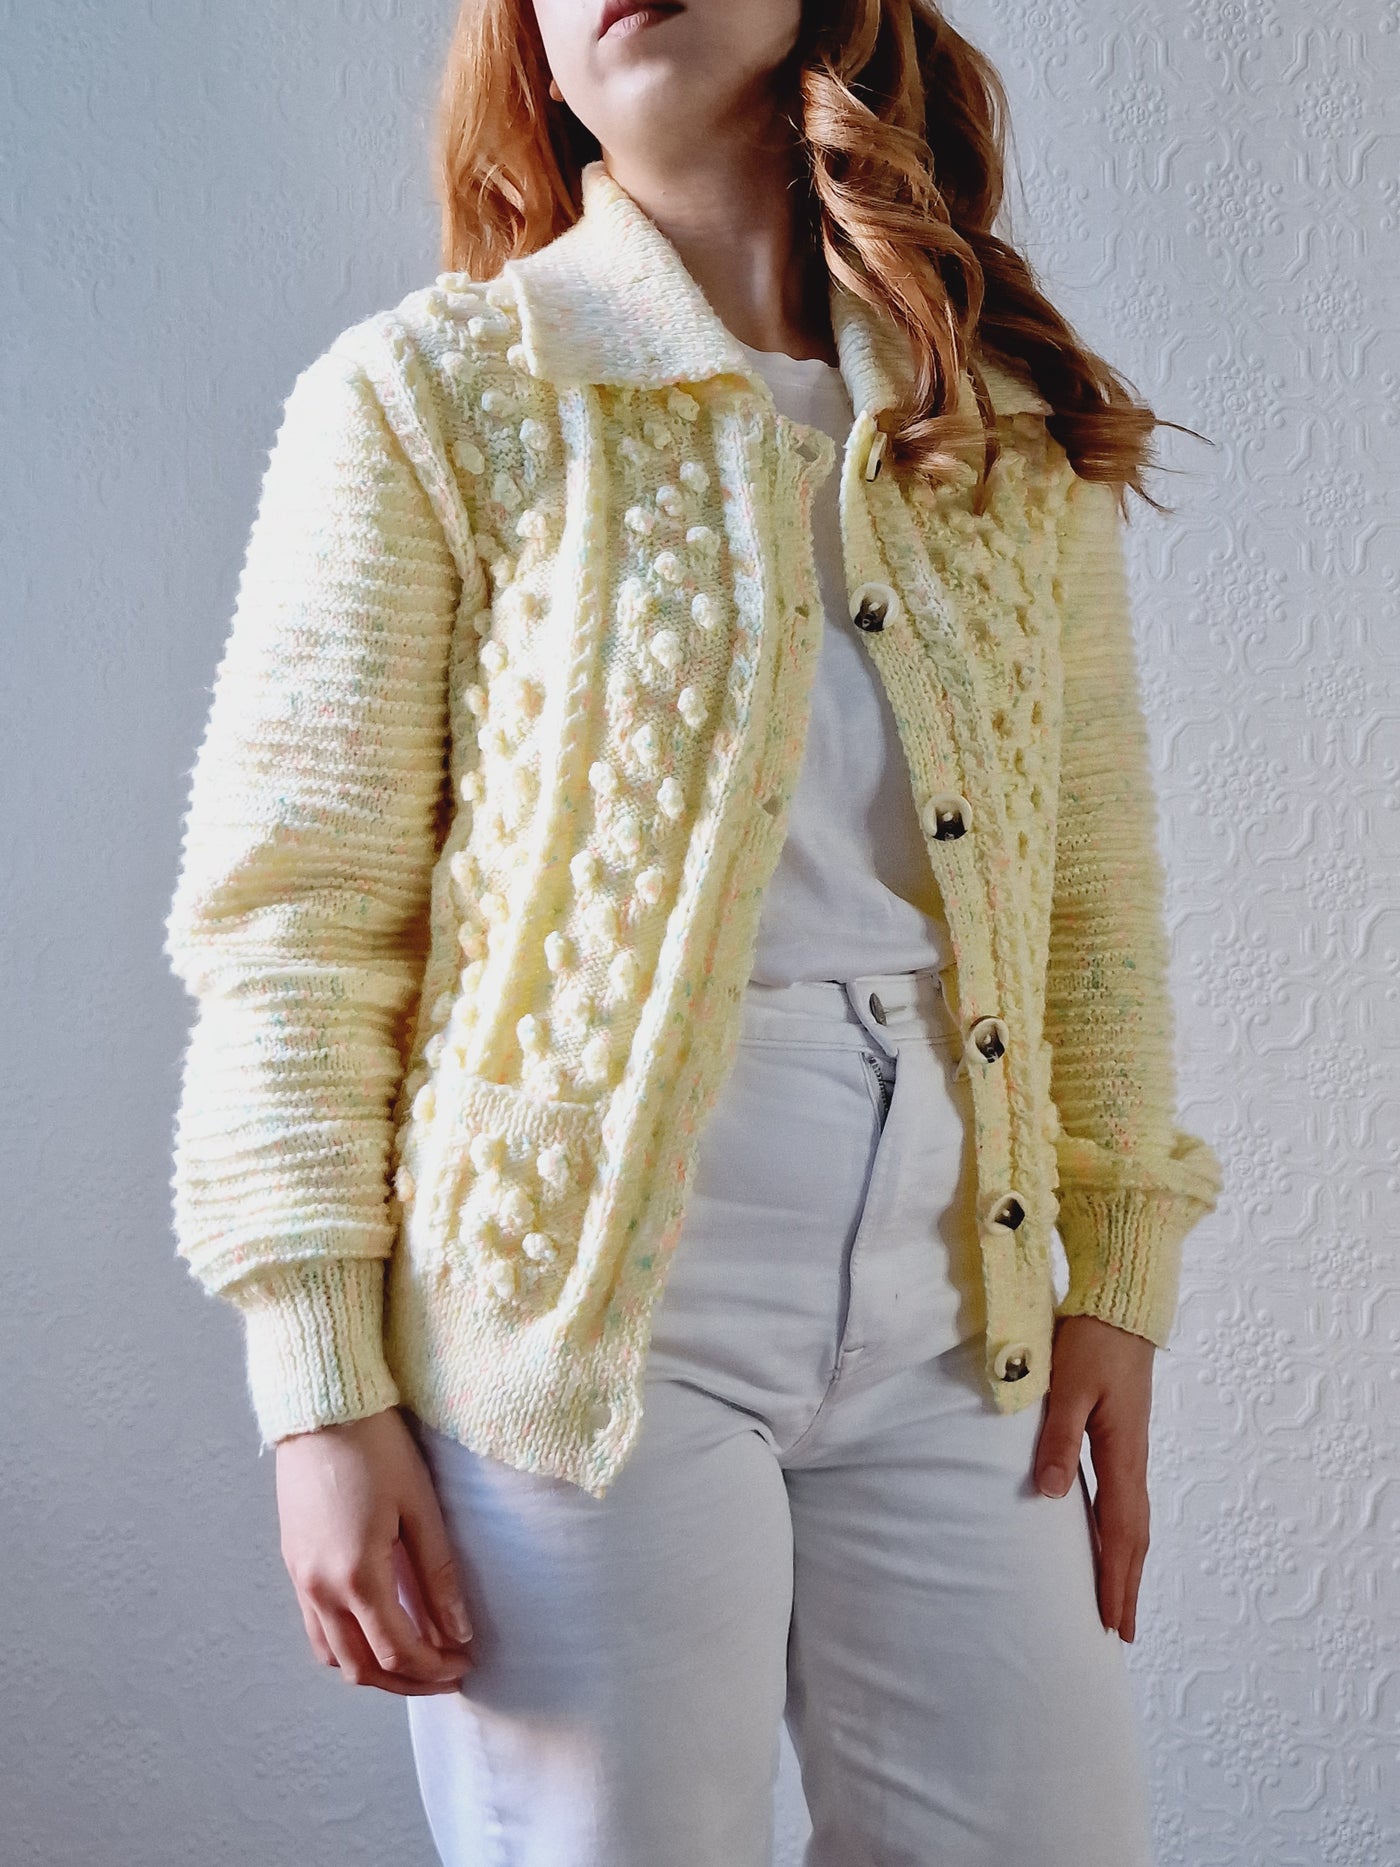 Vintage Handknitted Lemon Yellow Speckled Popcorn Knit Collared Cardigan - S/M